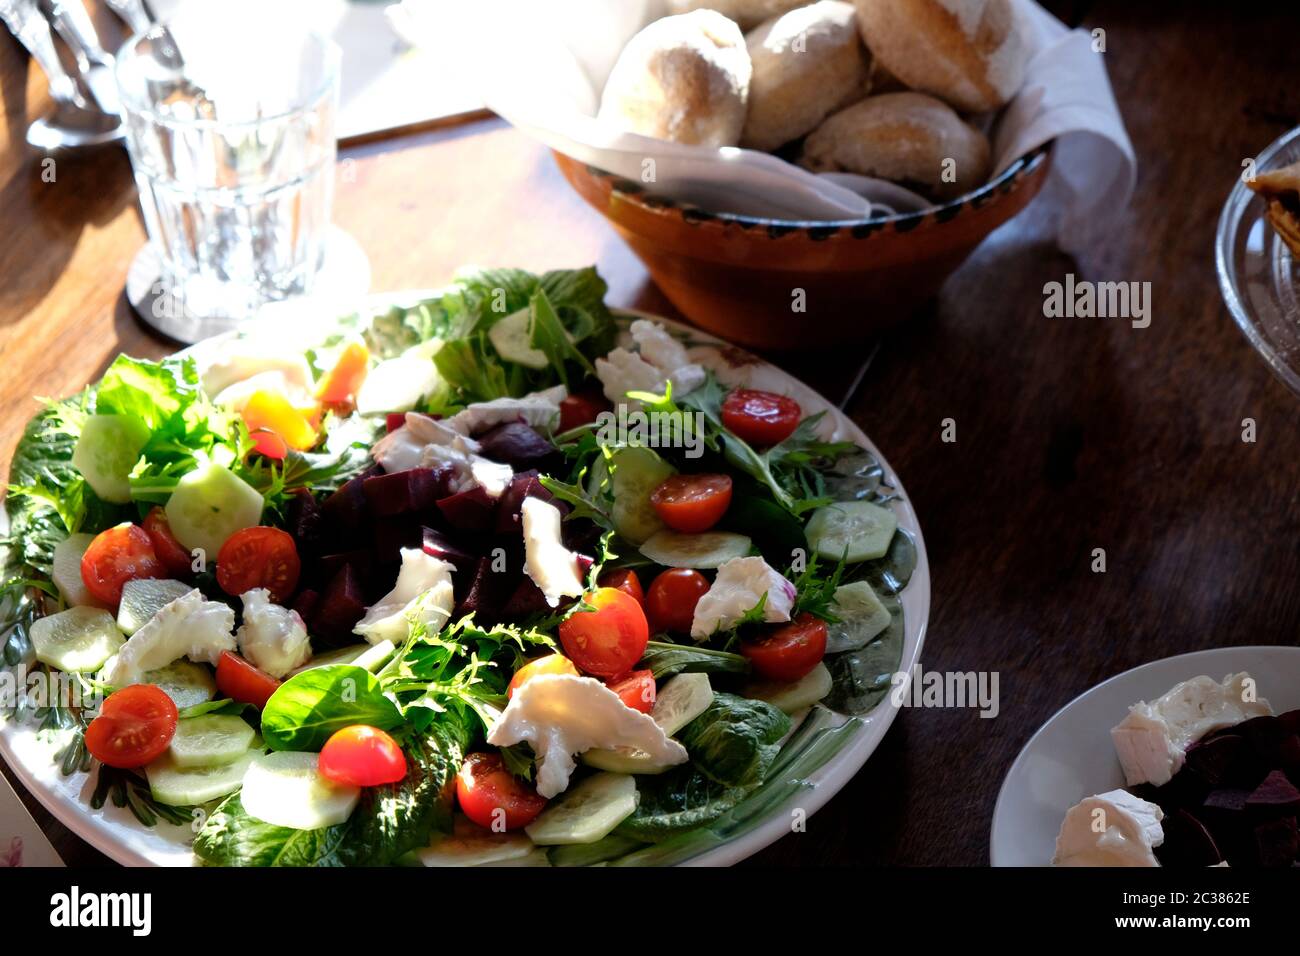 Healthy homemade lunch served on a sunny day in December Stock Photo